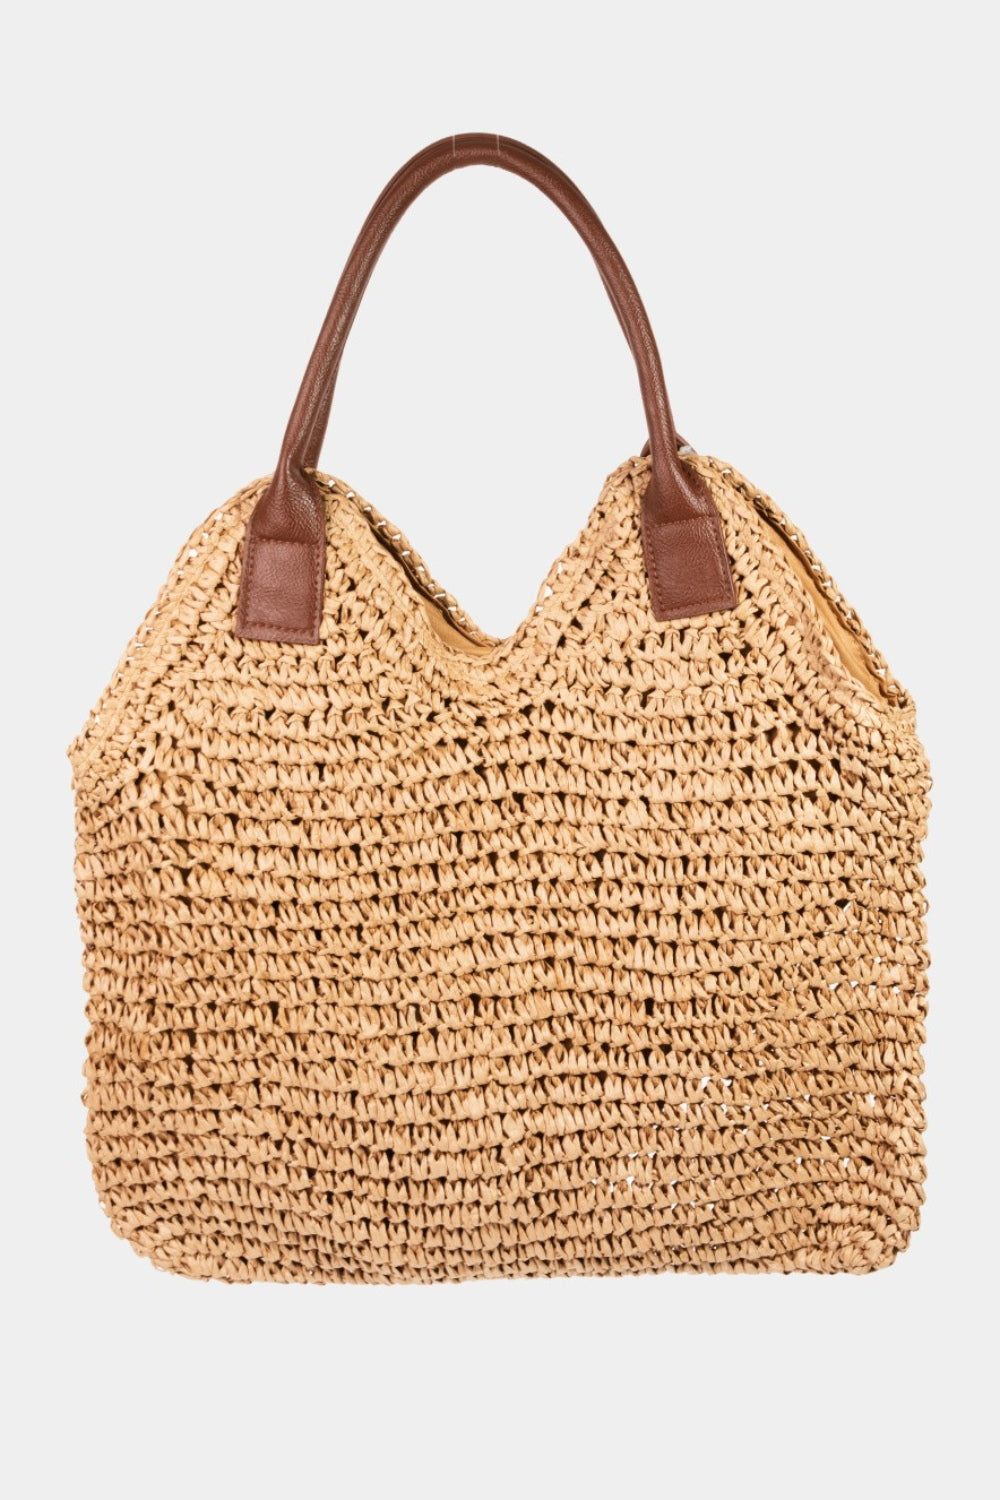 Straw Braided Faux Leather Strap Shoulder Bag is a stylish and trendy accessory that combines the natural aesthetic of straw with the sophistication of faux leather. The braided straw detailing adds a touch of bohemian charm, while the faux leather shoulder strap provides durability and a modern edge.